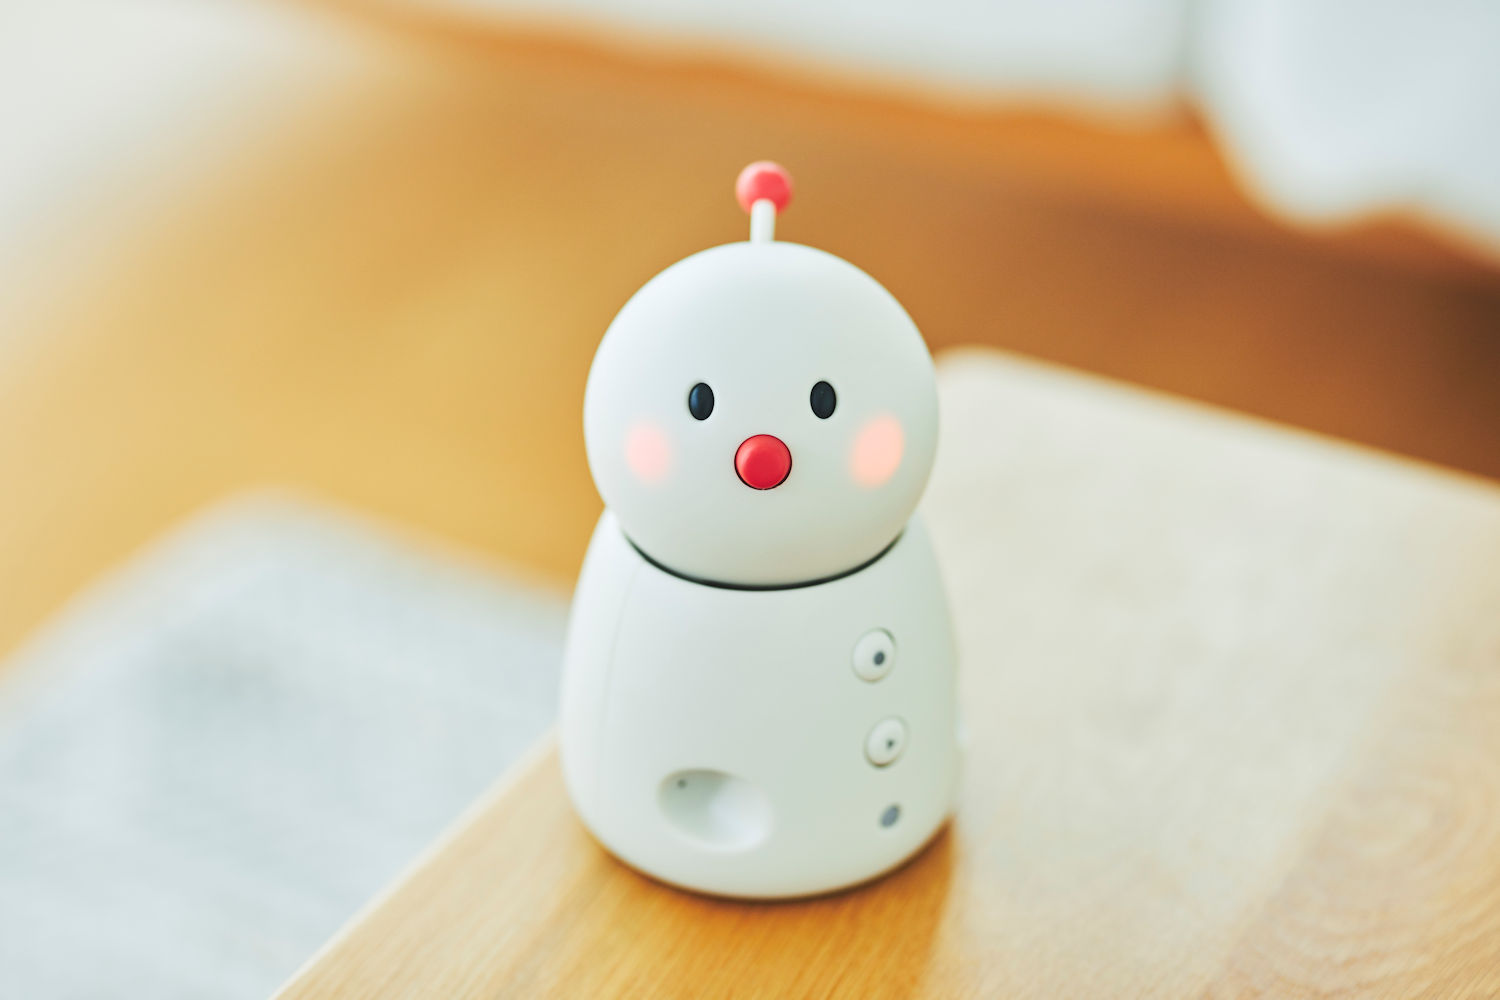 https://www.digitaltrends.com/wp-content/uploads/2020/01/bocco-emo-on-a-table.jpg?p=1